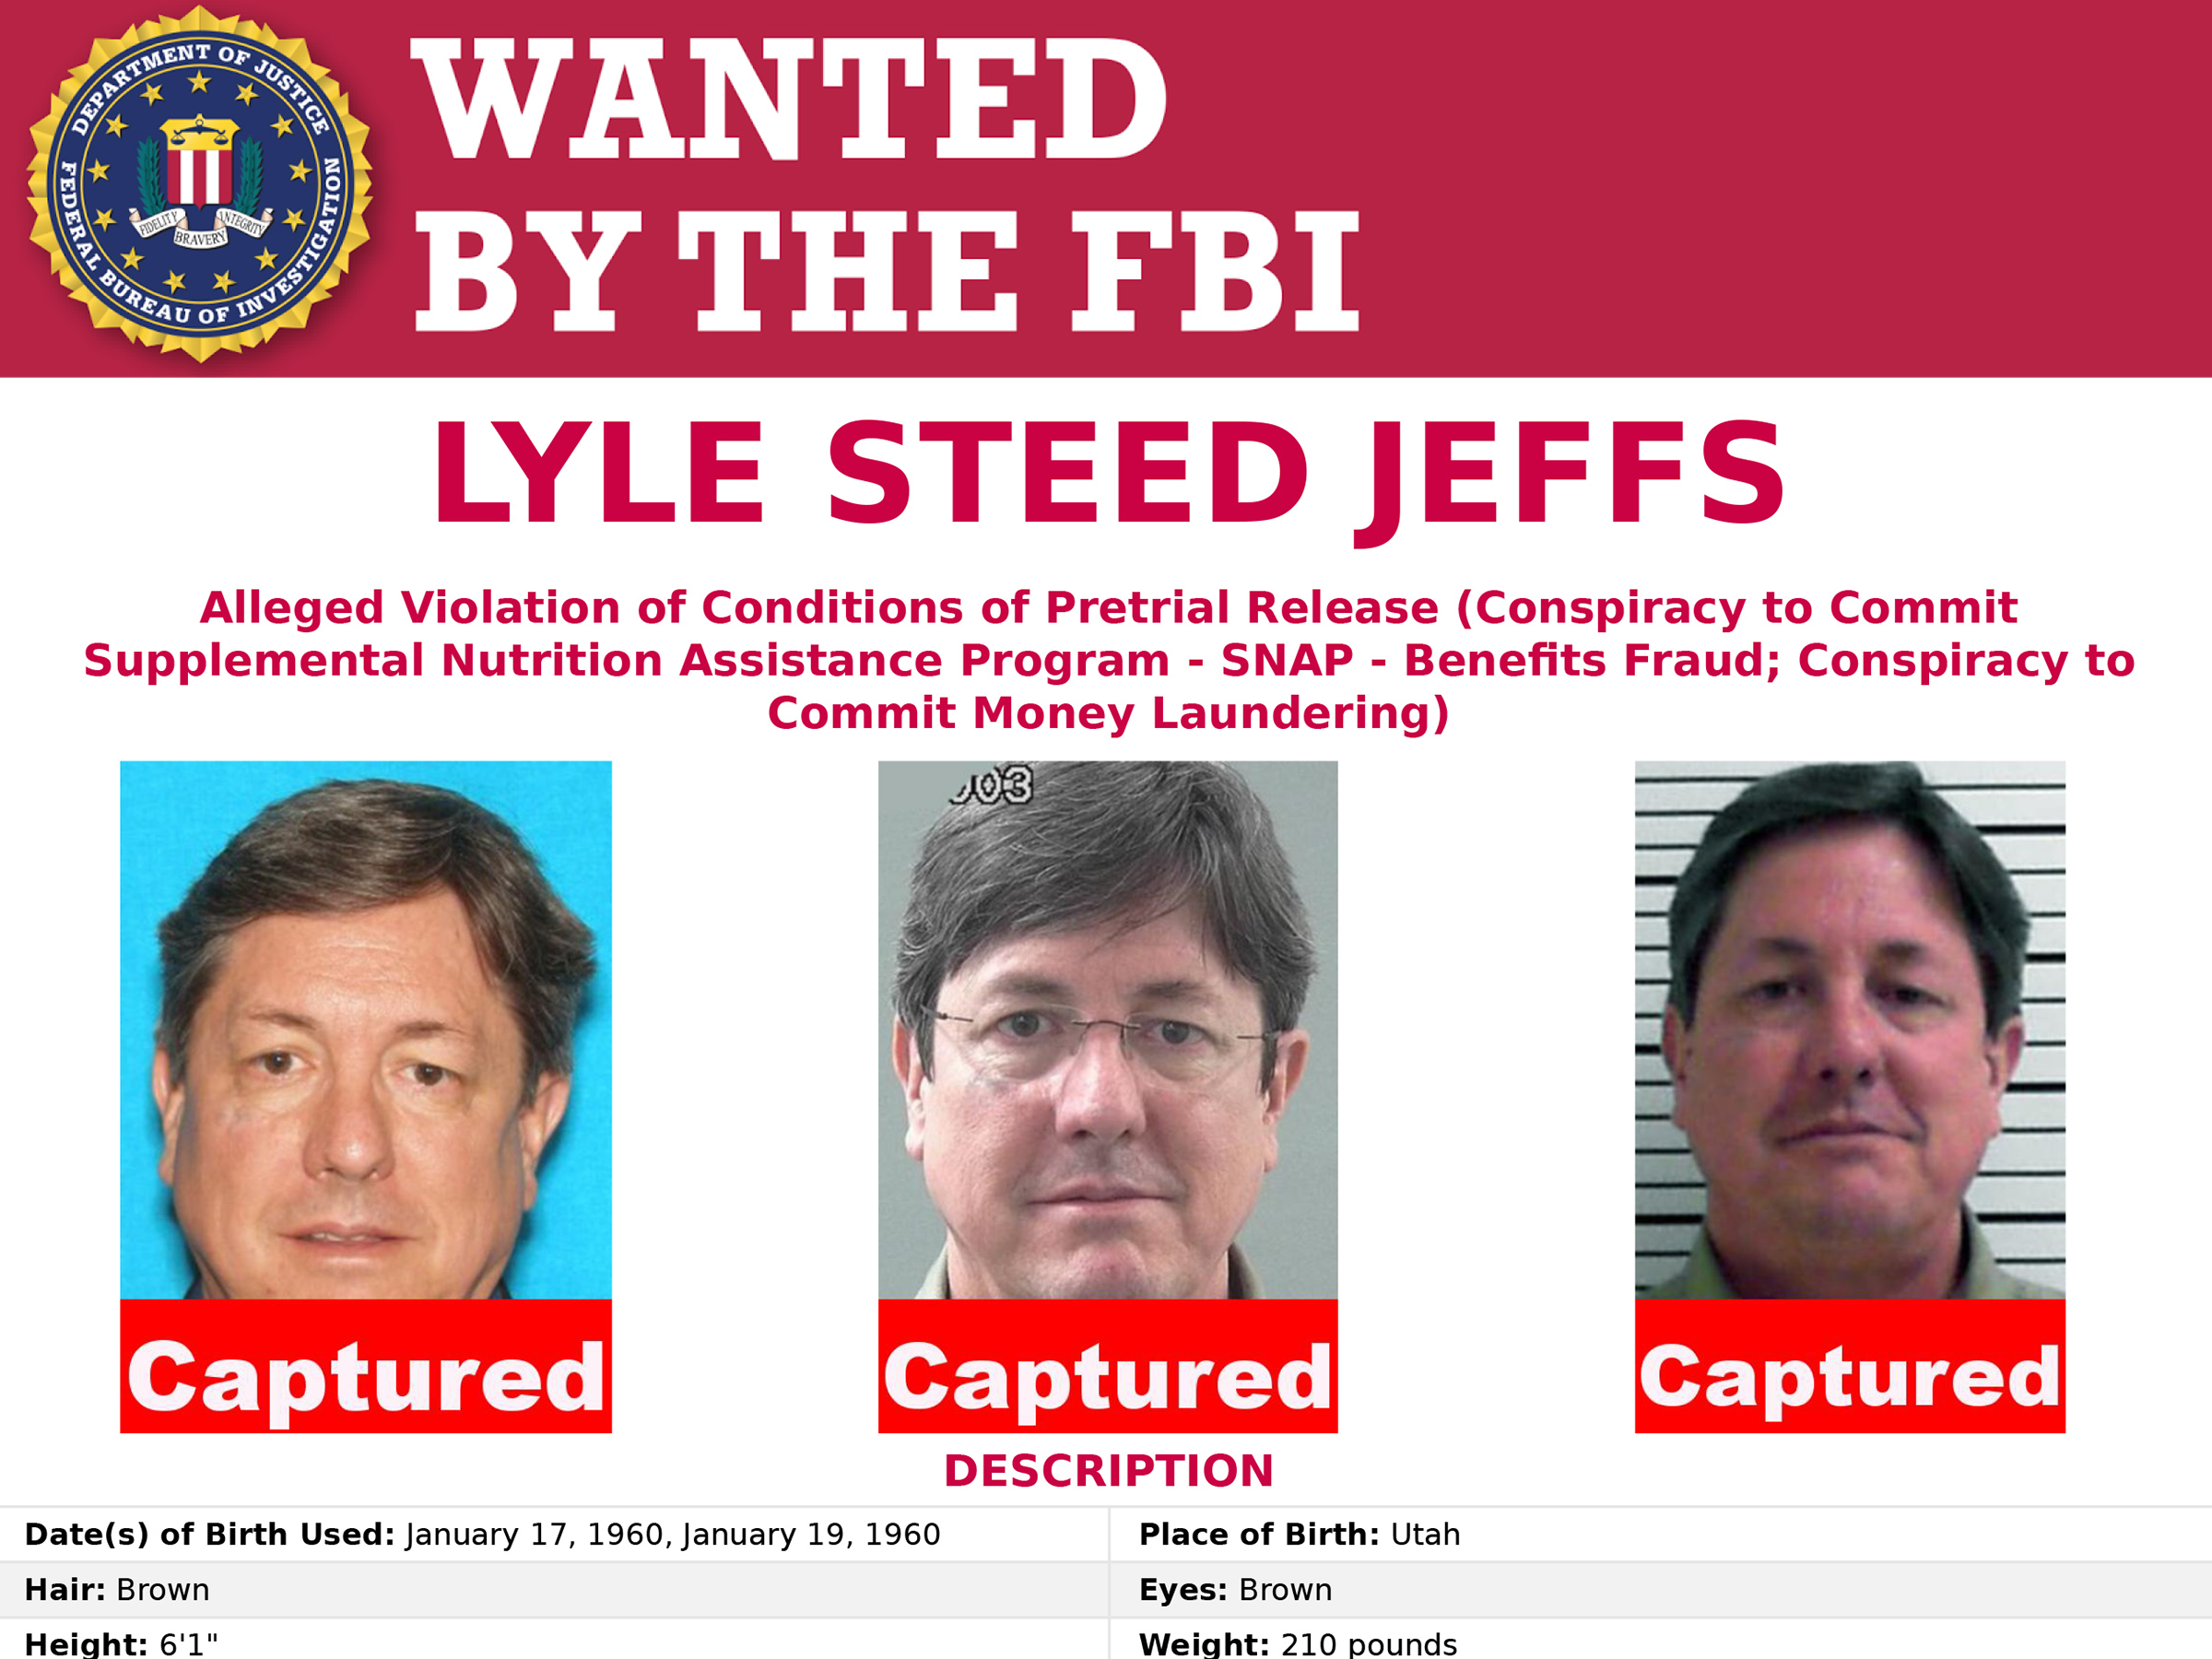 PRINT The FBI Wanted poster for Lyle Steed Jeffs. Image courtesy of the